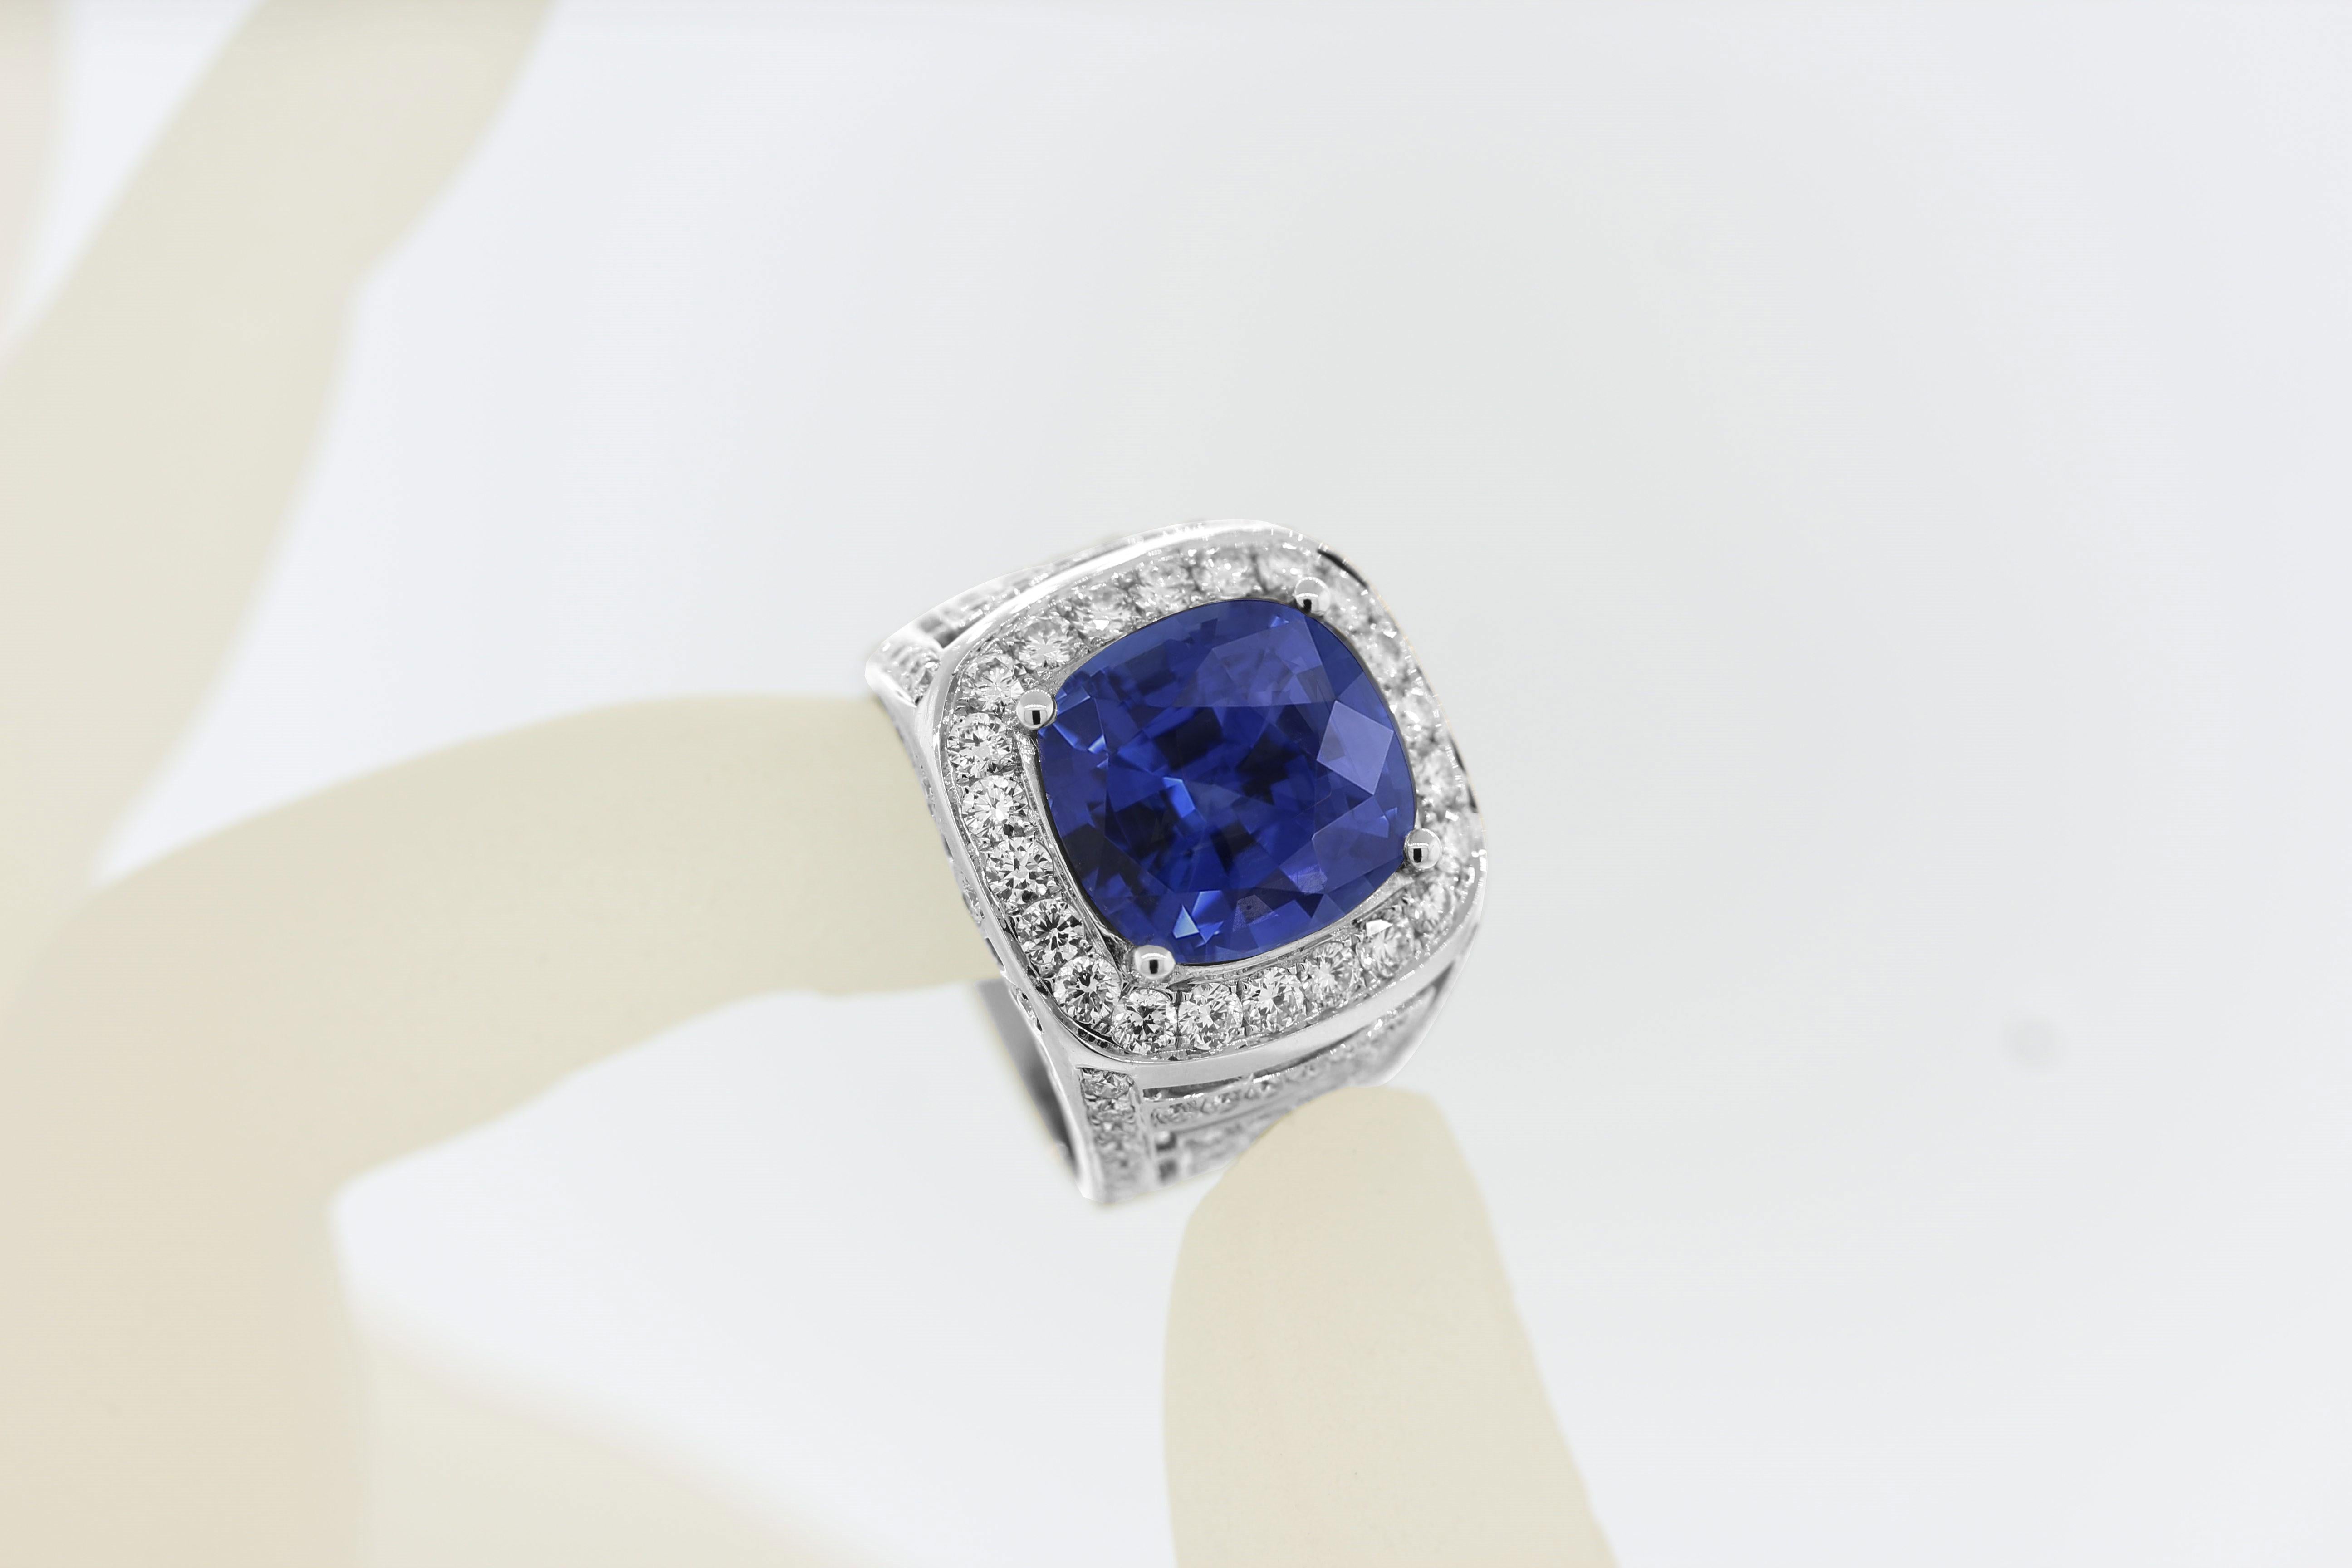 An exceptional sapphire weighing 9.06 carats with a vibrant and intense blue color. It is so fine the stone was submitted to 3 different international laboratories to get tested, SSEF based in Switzerland, GIA in the USA and Lotus in Thailand. It